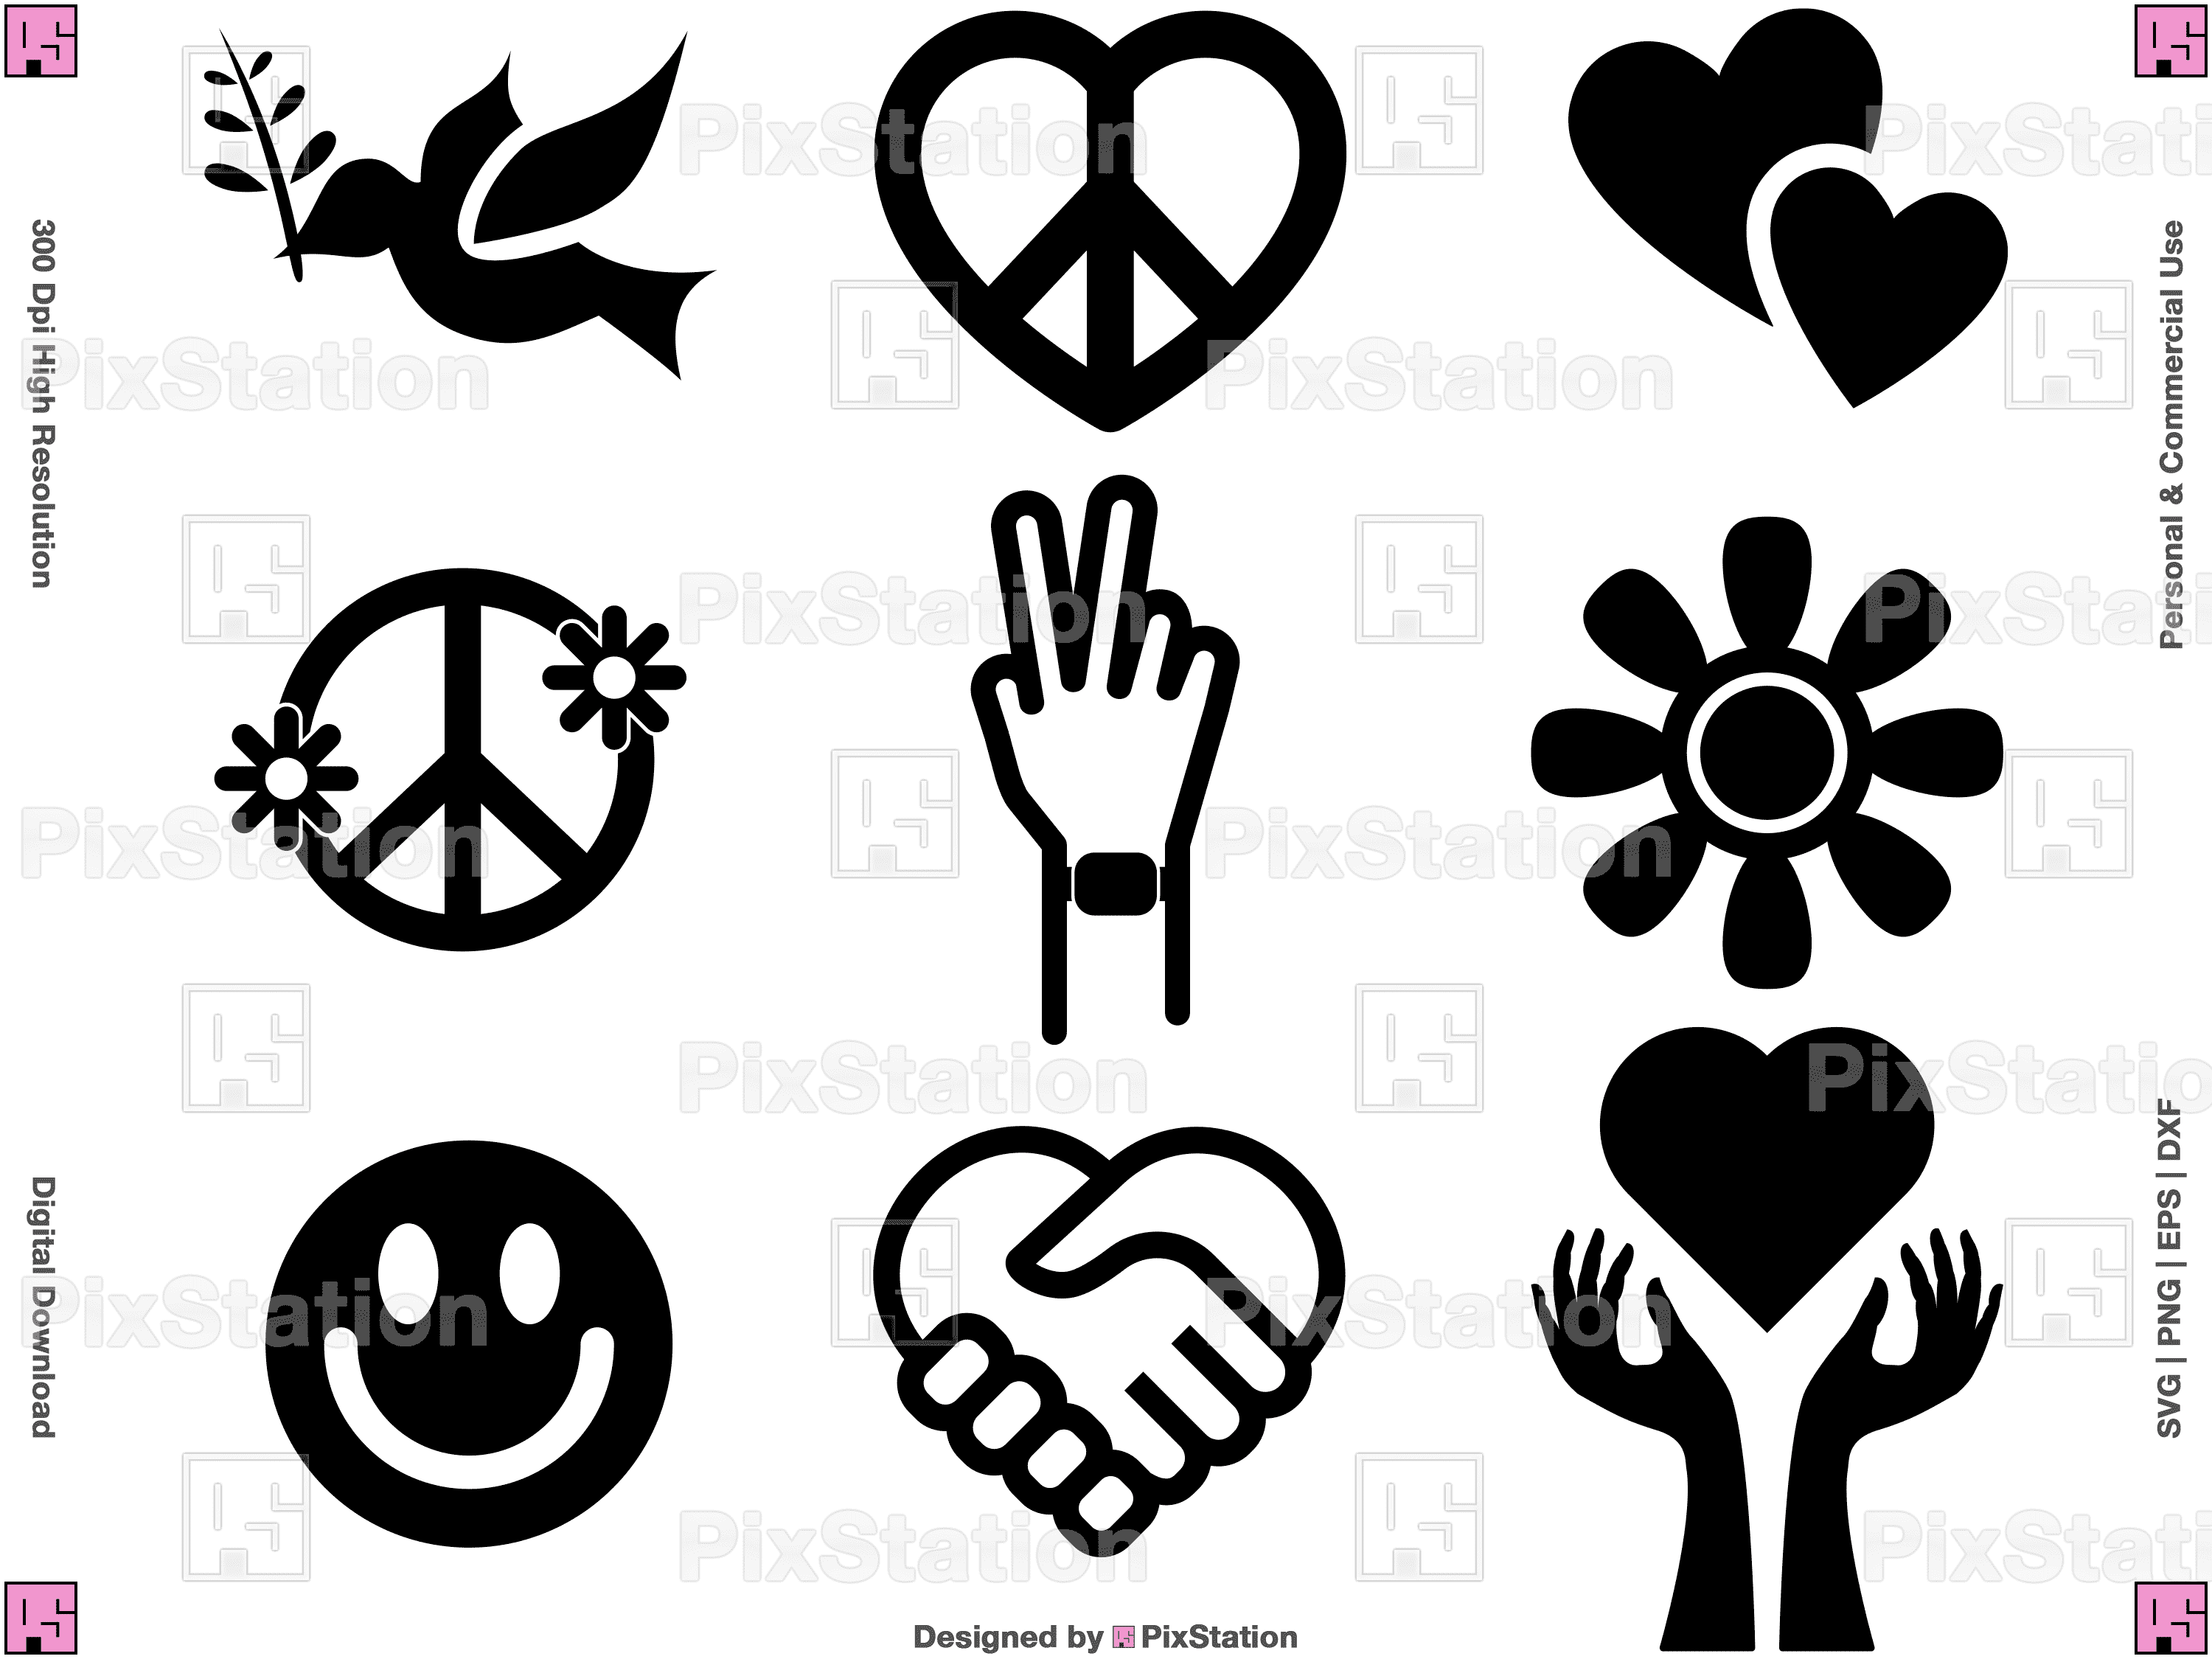 Peace and Love - Instant Digital Download - svg, png, dxf, and eps files  included! Peace Hand, Peace Sign, Signal, Heart